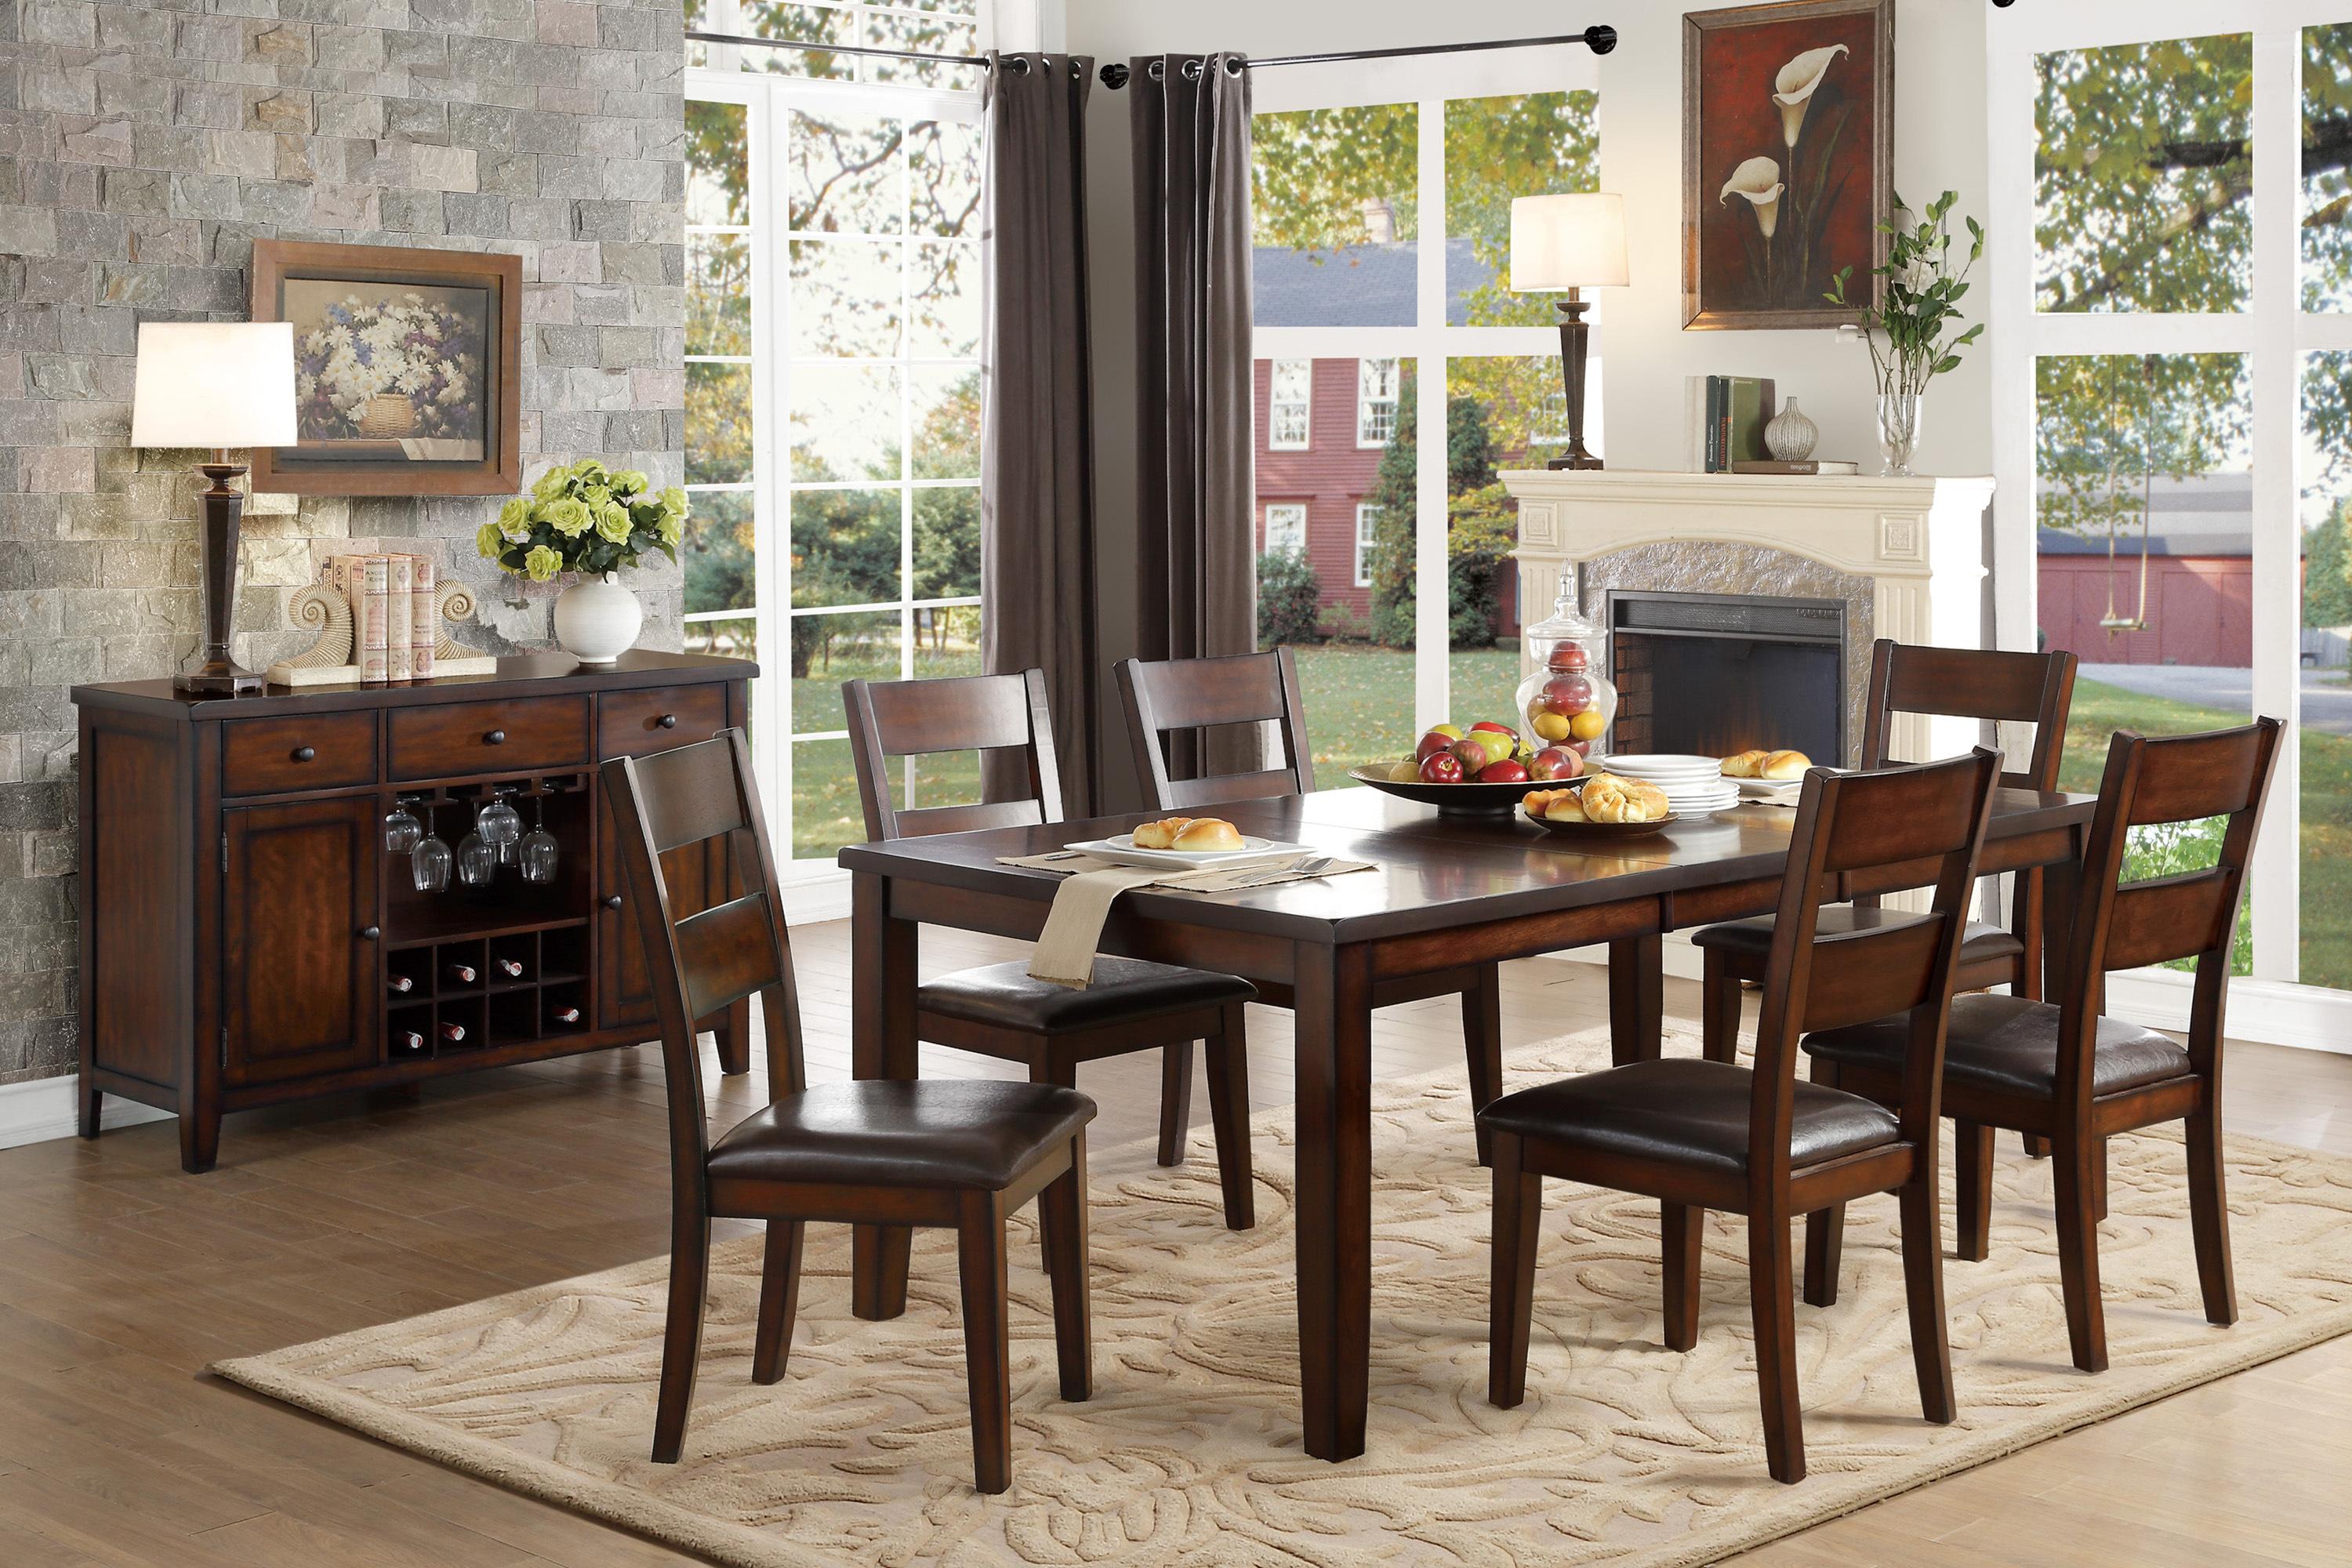 Transitional Dining Room Set 5547-78*8PC Mantello 5547-78*8PC in Cherry Faux Leather